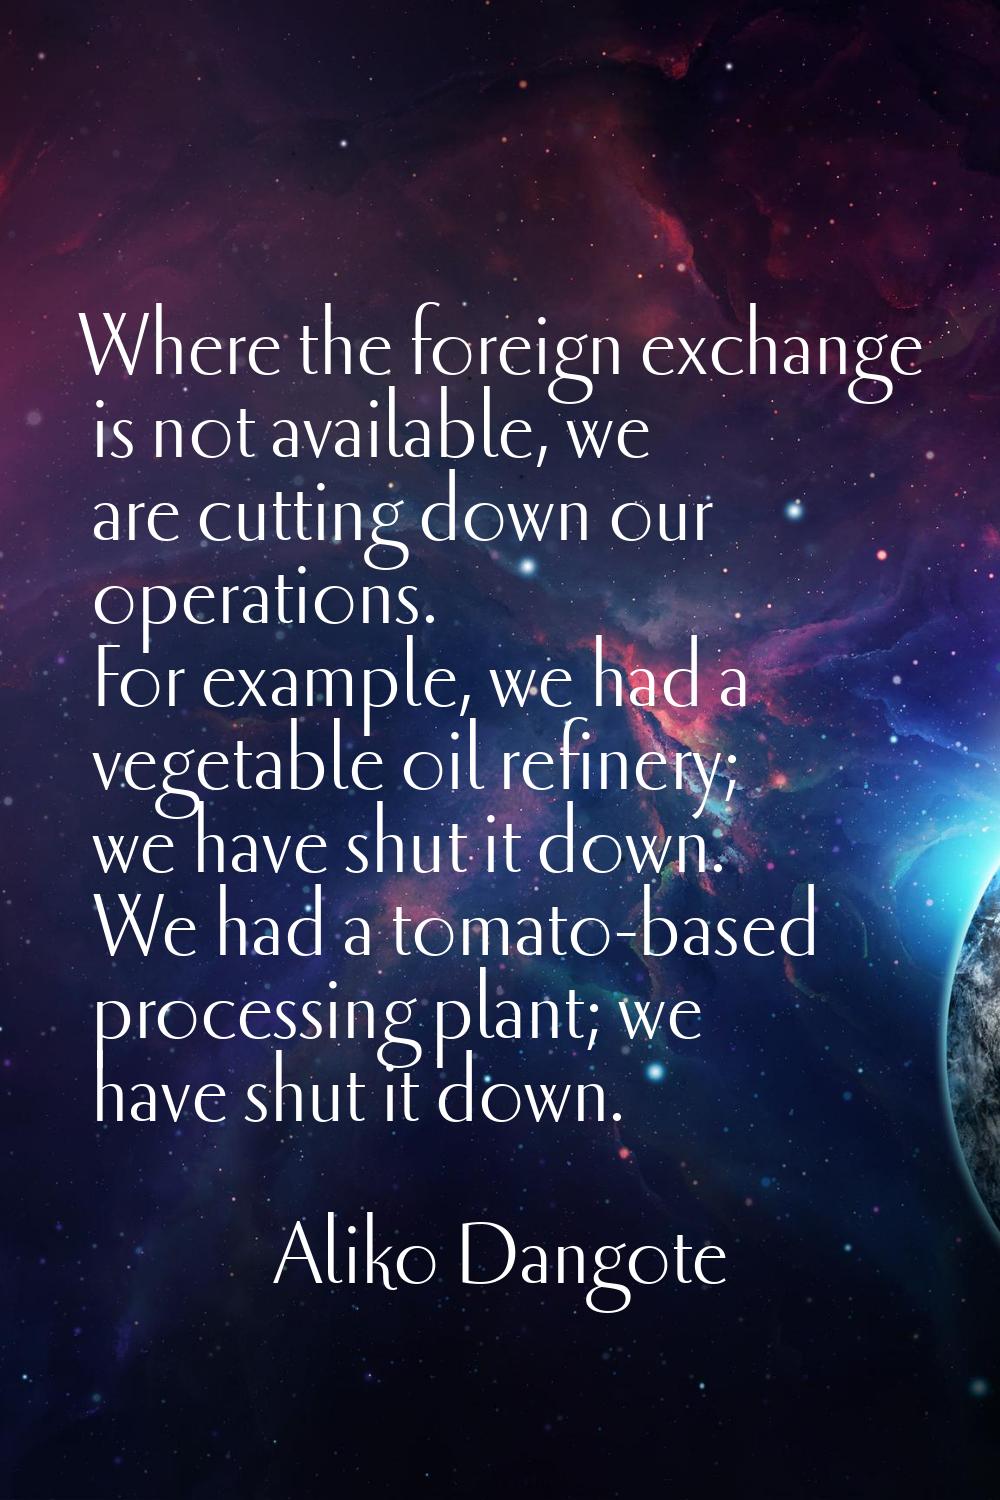 Where the foreign exchange is not available, we are cutting down our operations. For example, we ha